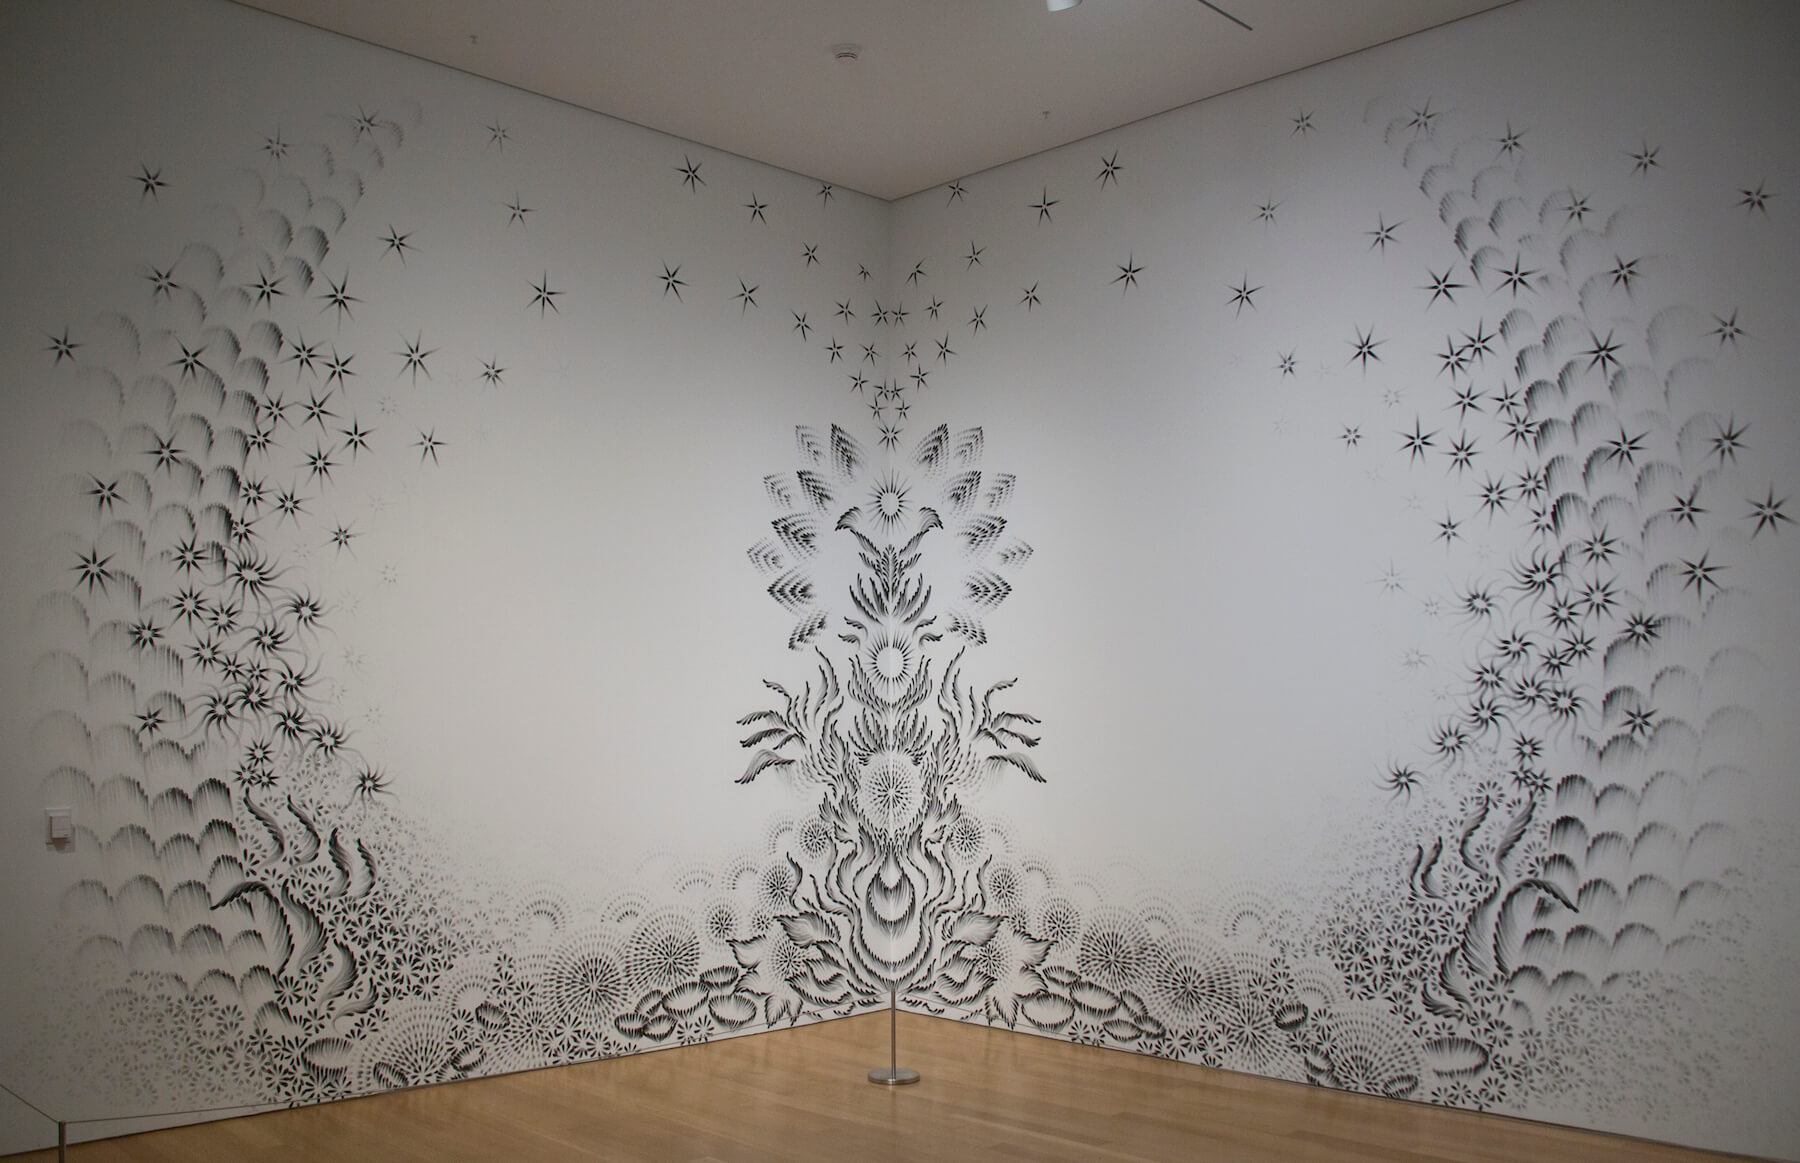 Judith Braun's work in the Grand Rapids Art Museum. Image courtesy the artist, the Museum and ArtPrize.